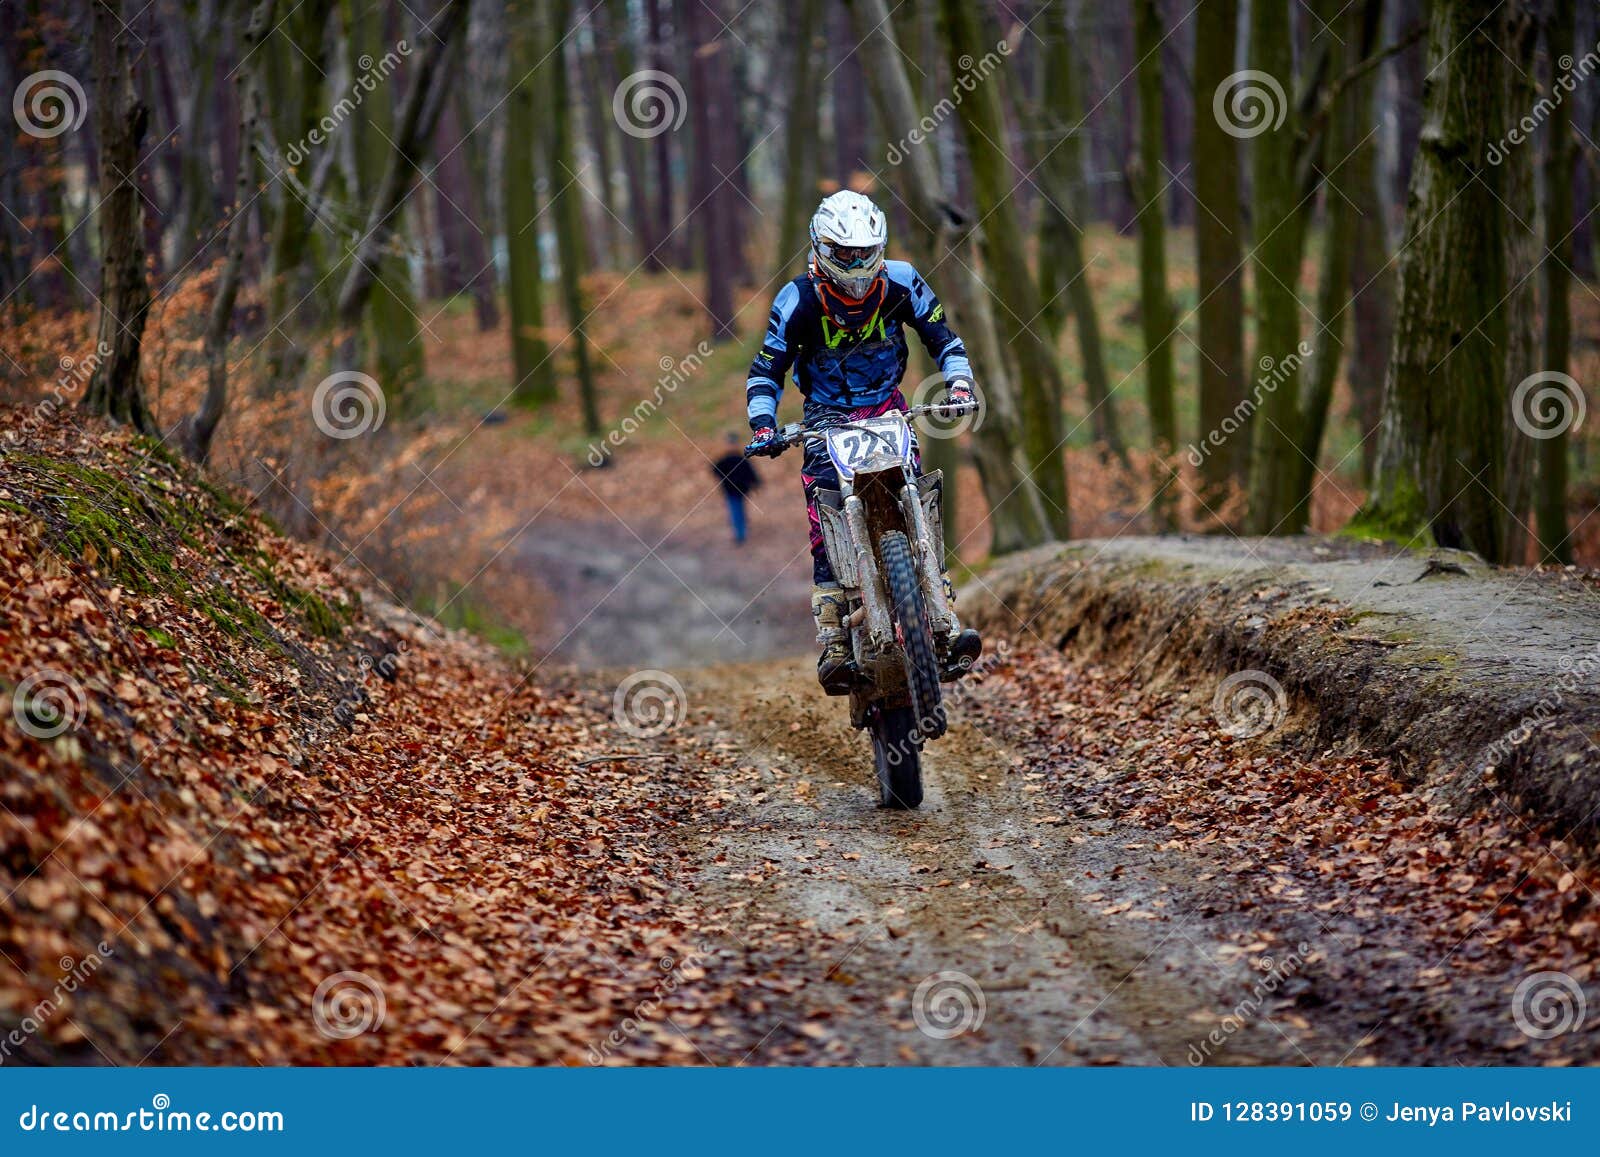 Man Riding A Motorcycle Fast In Autumn Forest. Blurred